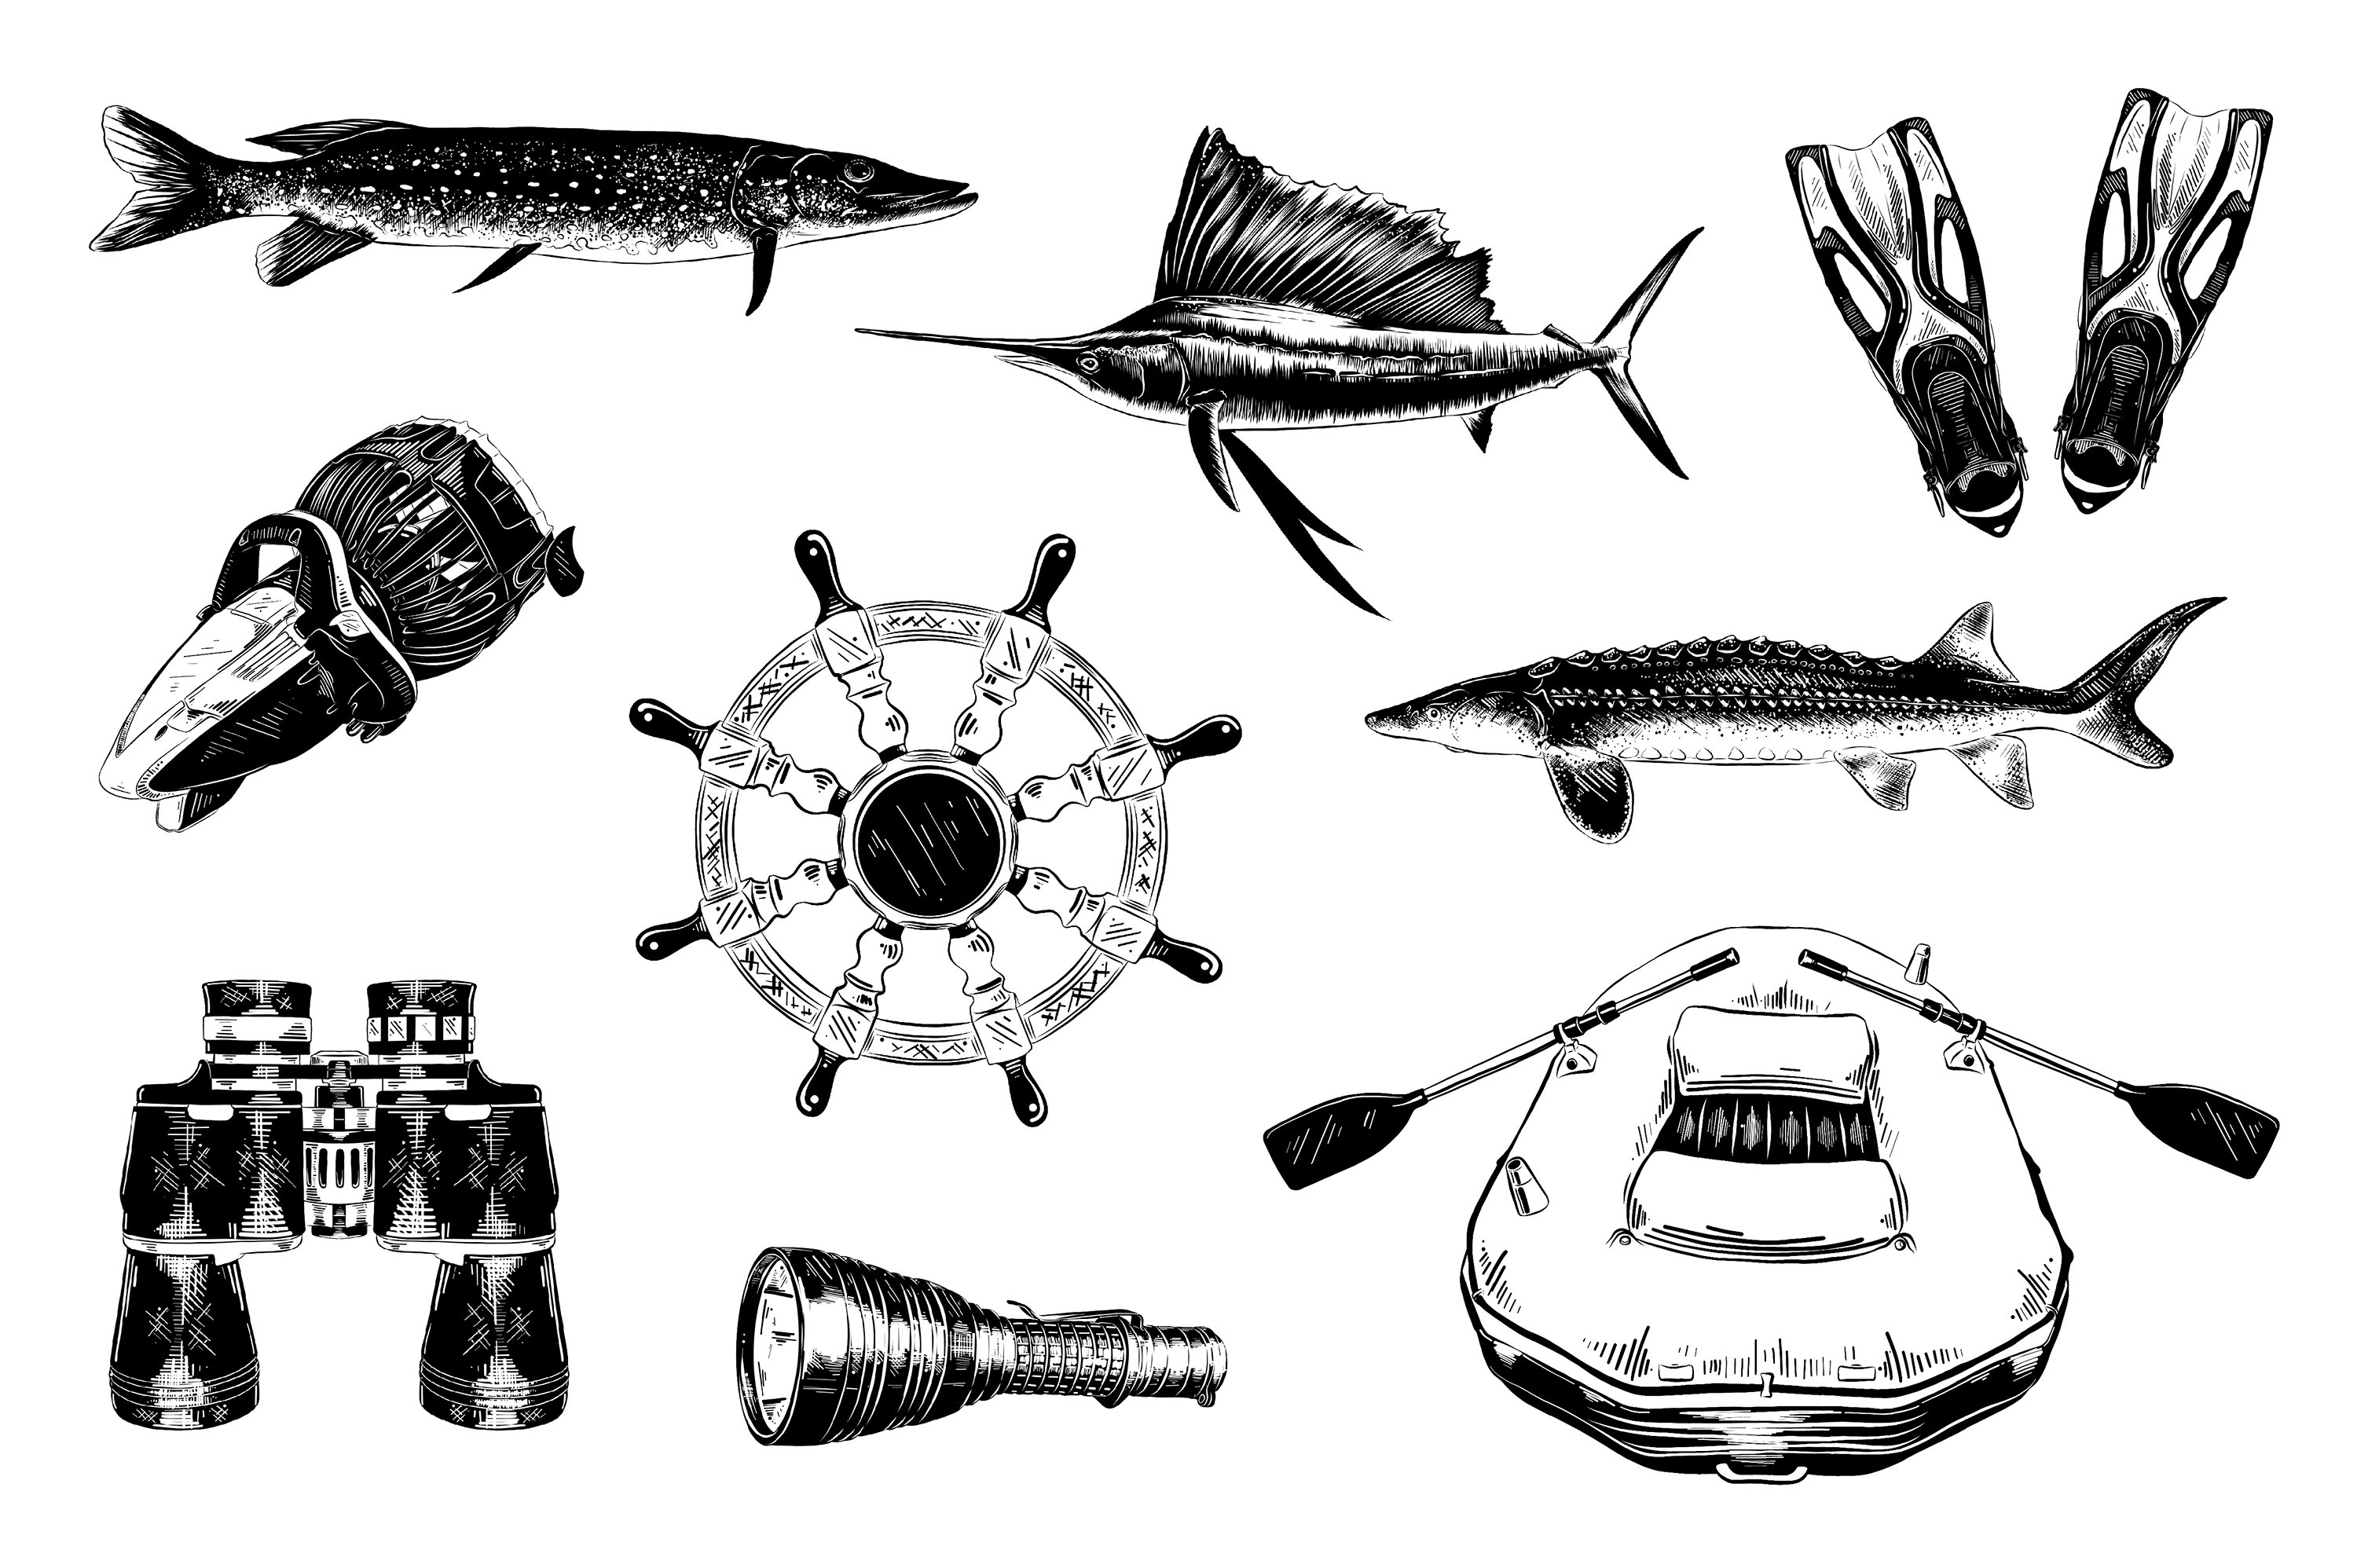 Black and white drawing of different types of fish.